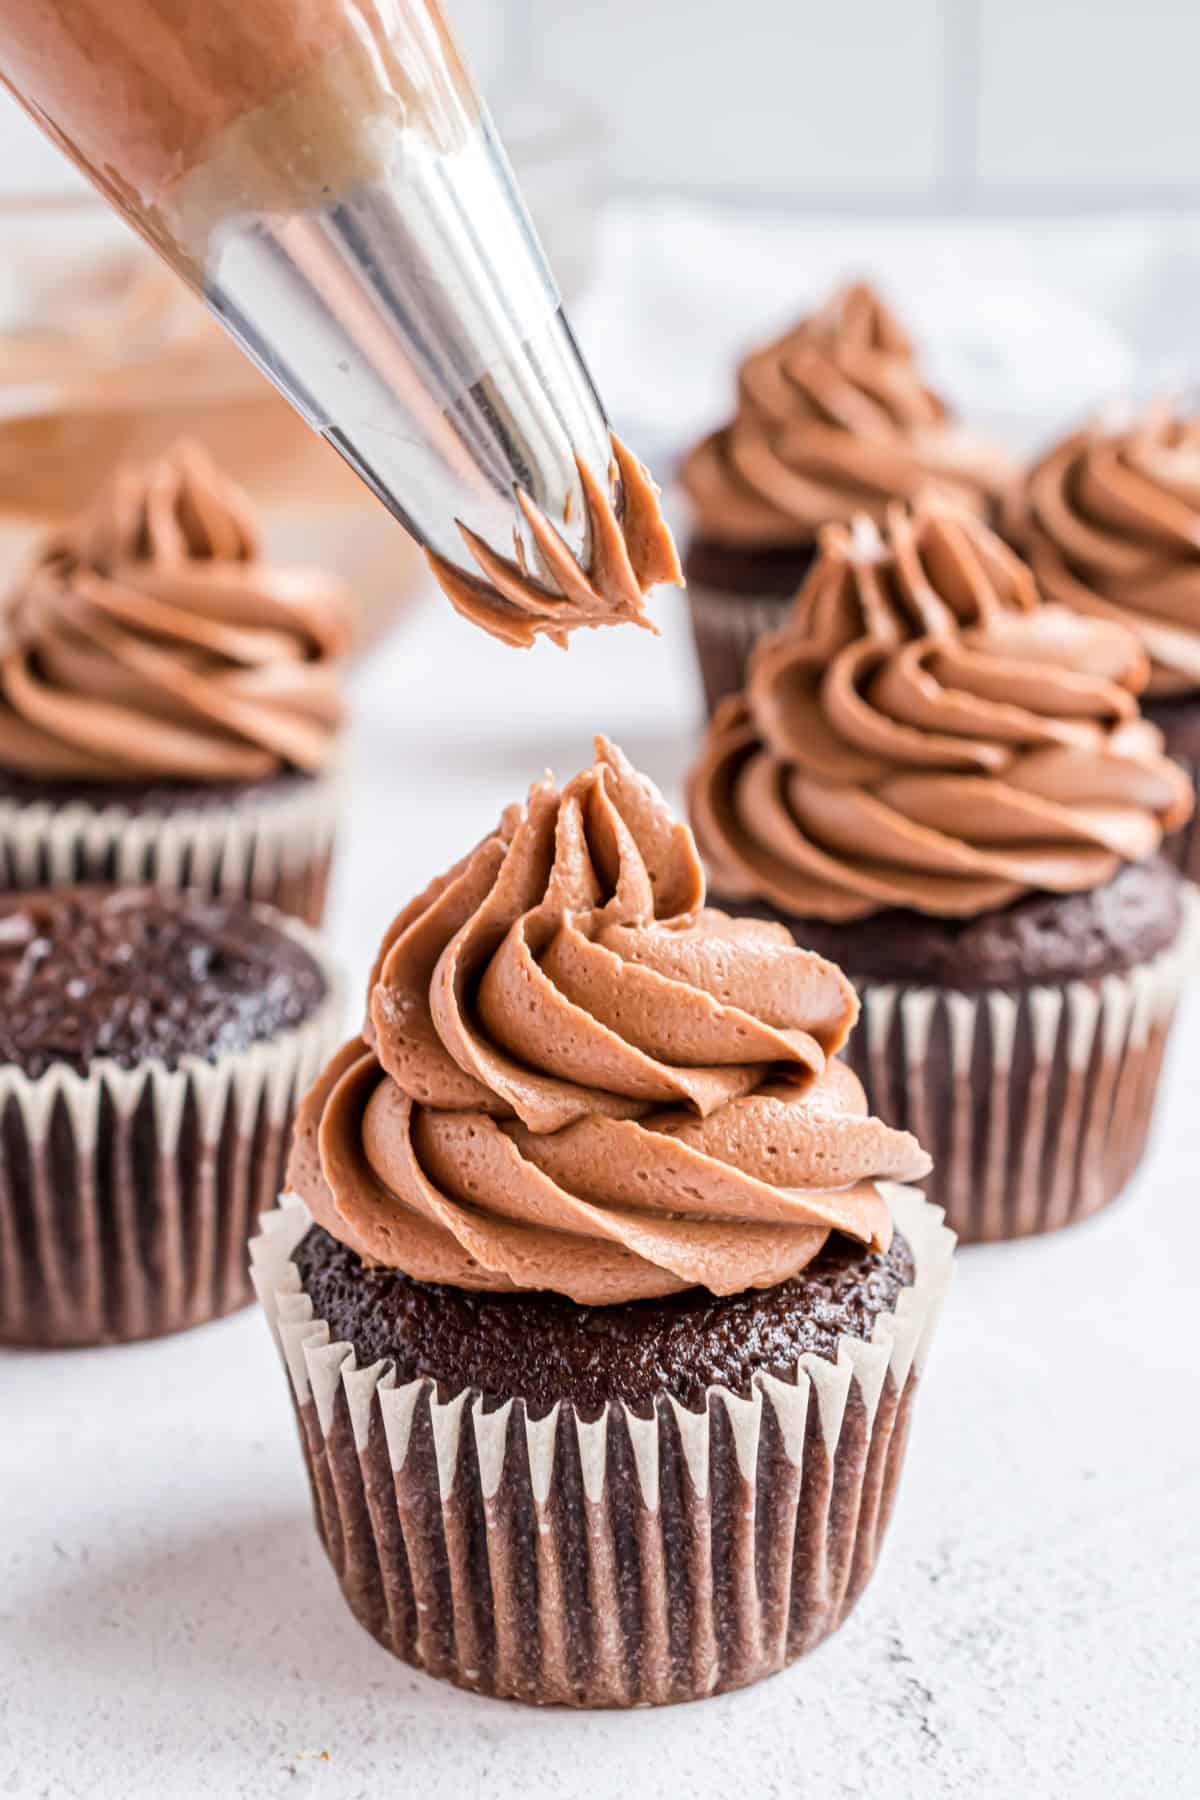 Chocolate cupcakes with chocolate frosting being piped onto them.